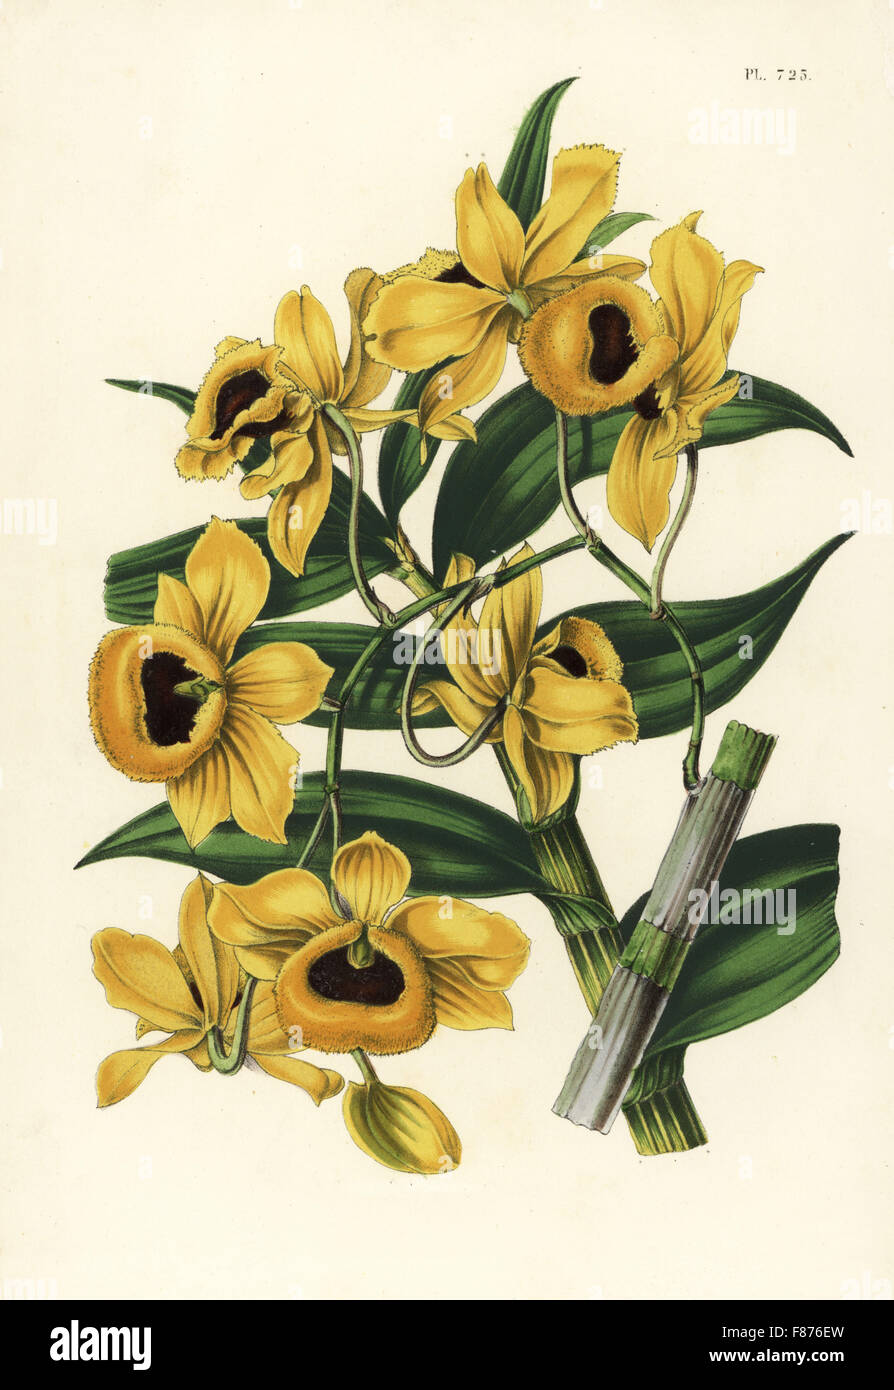 Golden yellow-flowered dendrobium orchid, Dendrobium chrysanthum (Dendrobium paxtonii). Handcoloured lithograph from Louis van Houtte and Charles Lemaire's Flowers of the Gardens and Hothouses of Europe, Flore des Serres et des Jardins de l'Europe, Ghent, Belgium, 1851. Stock Photo